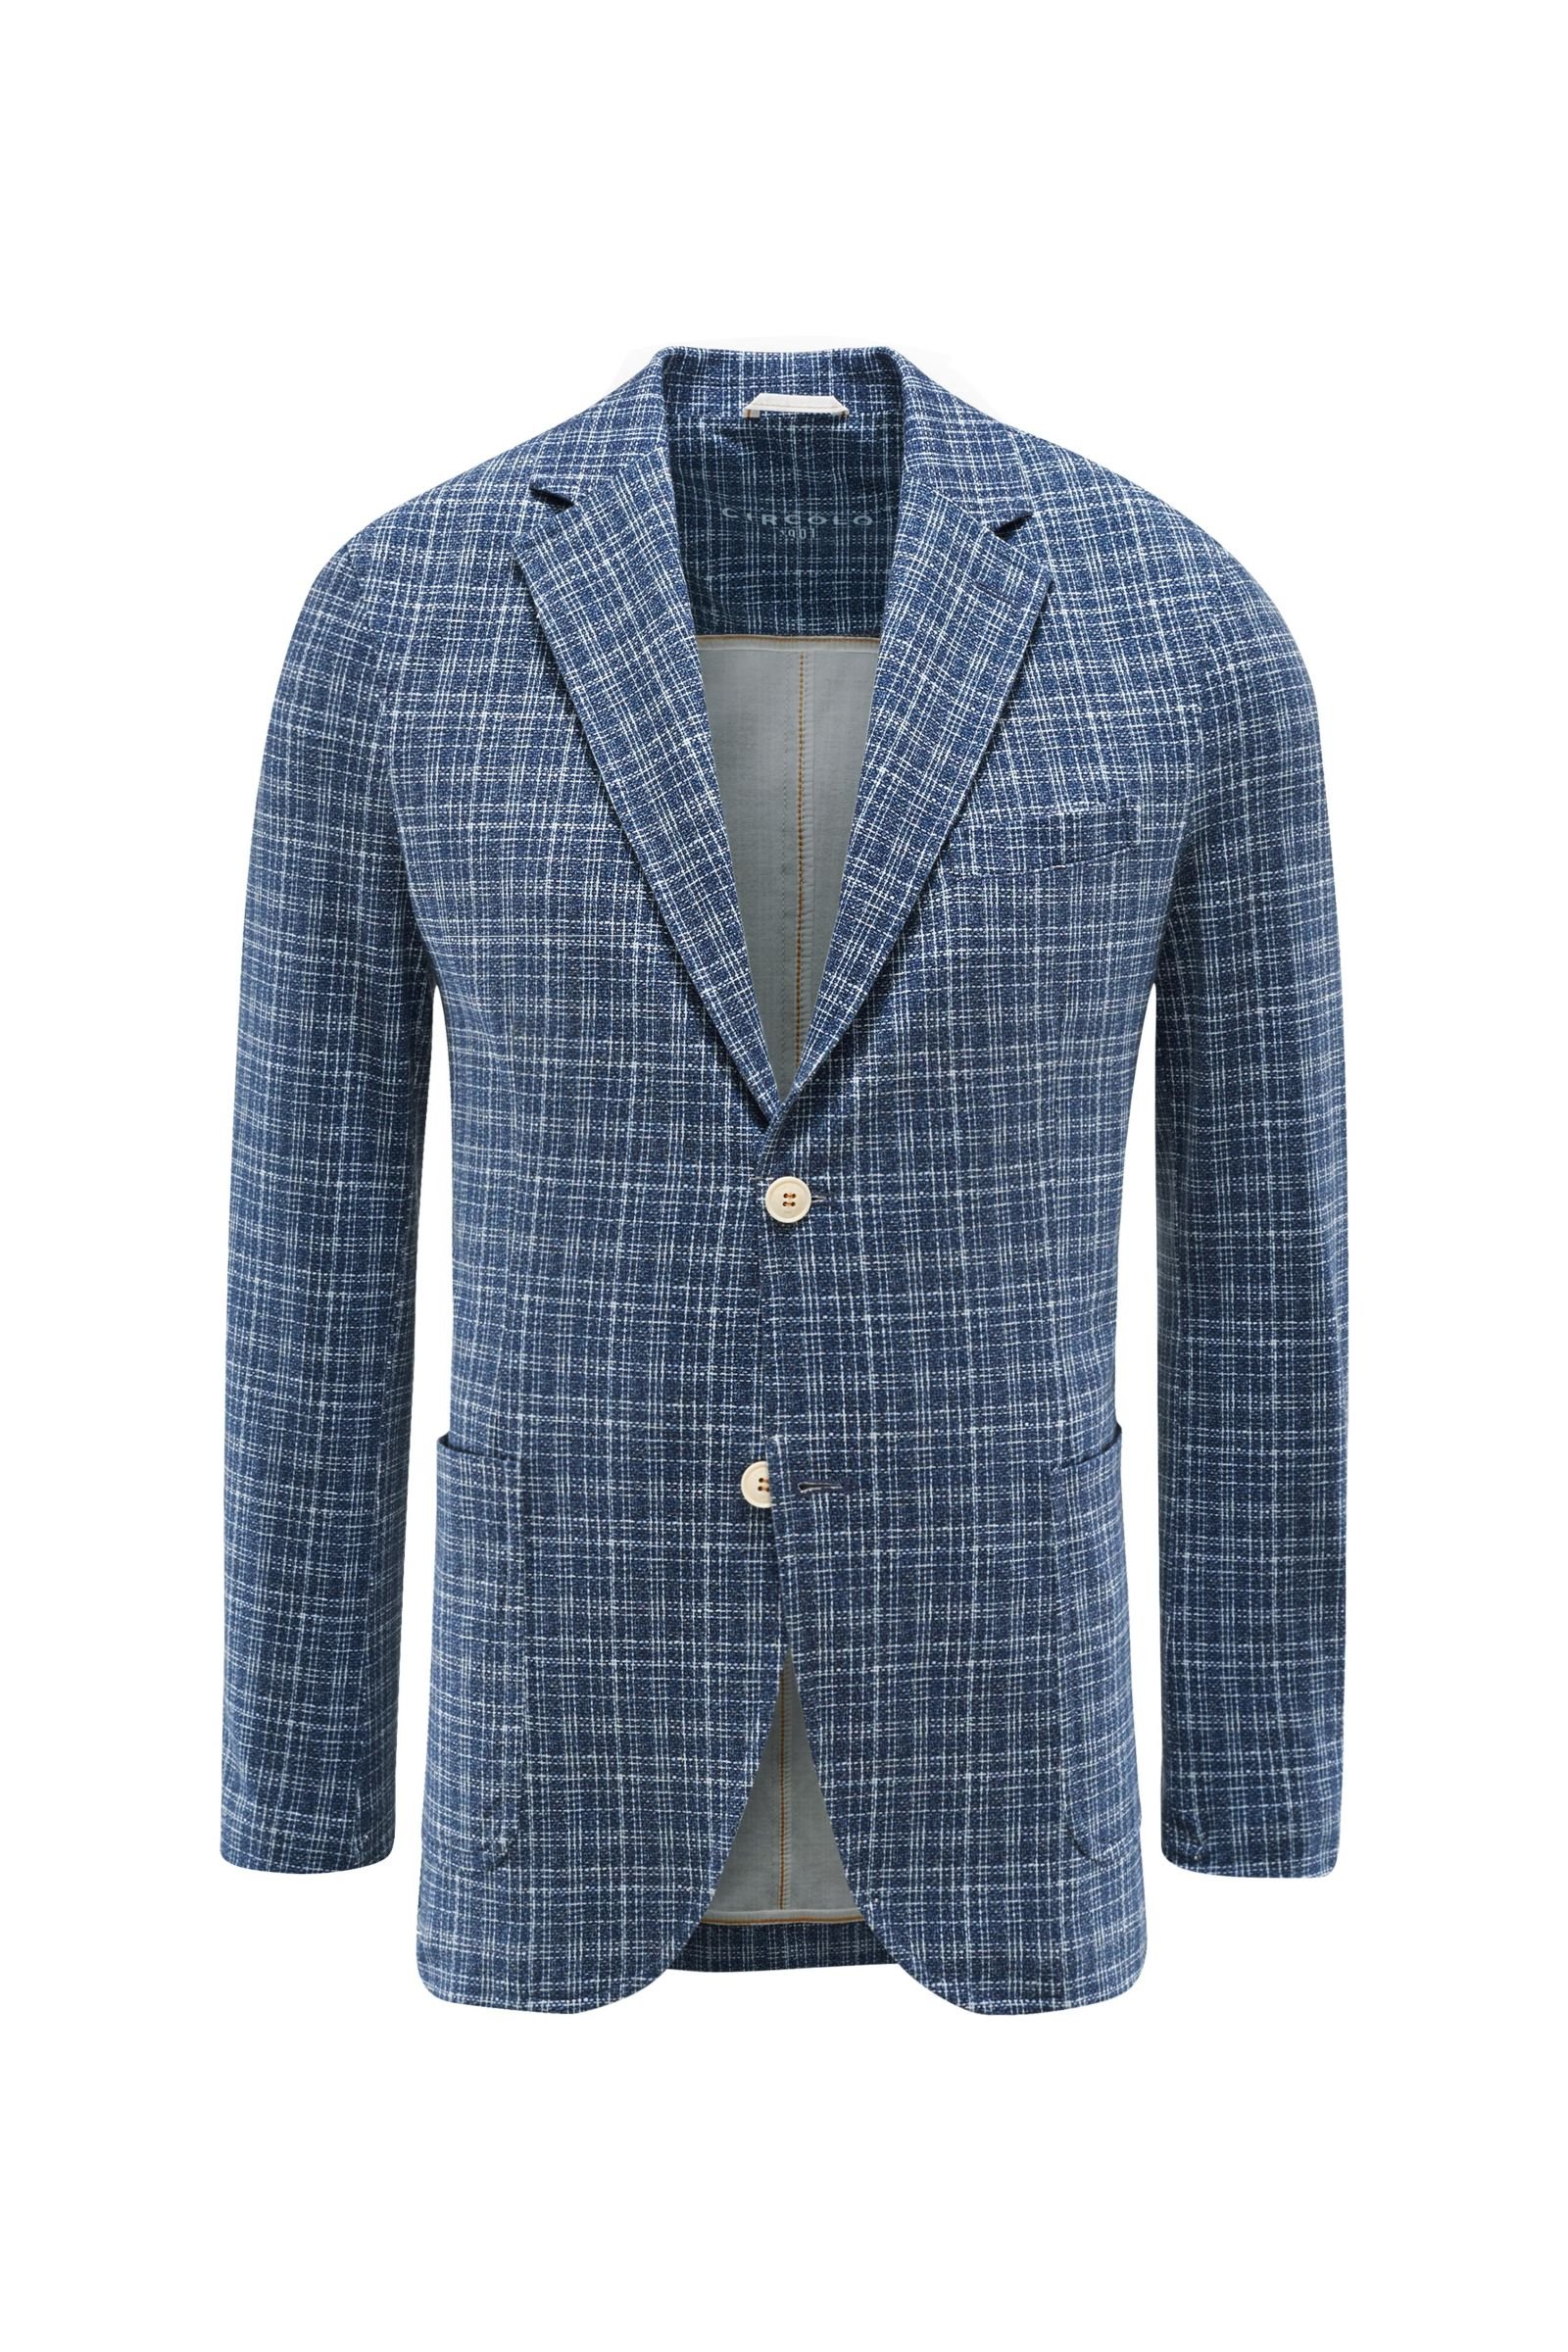 Jersey jacket 'Giacca' blue checked